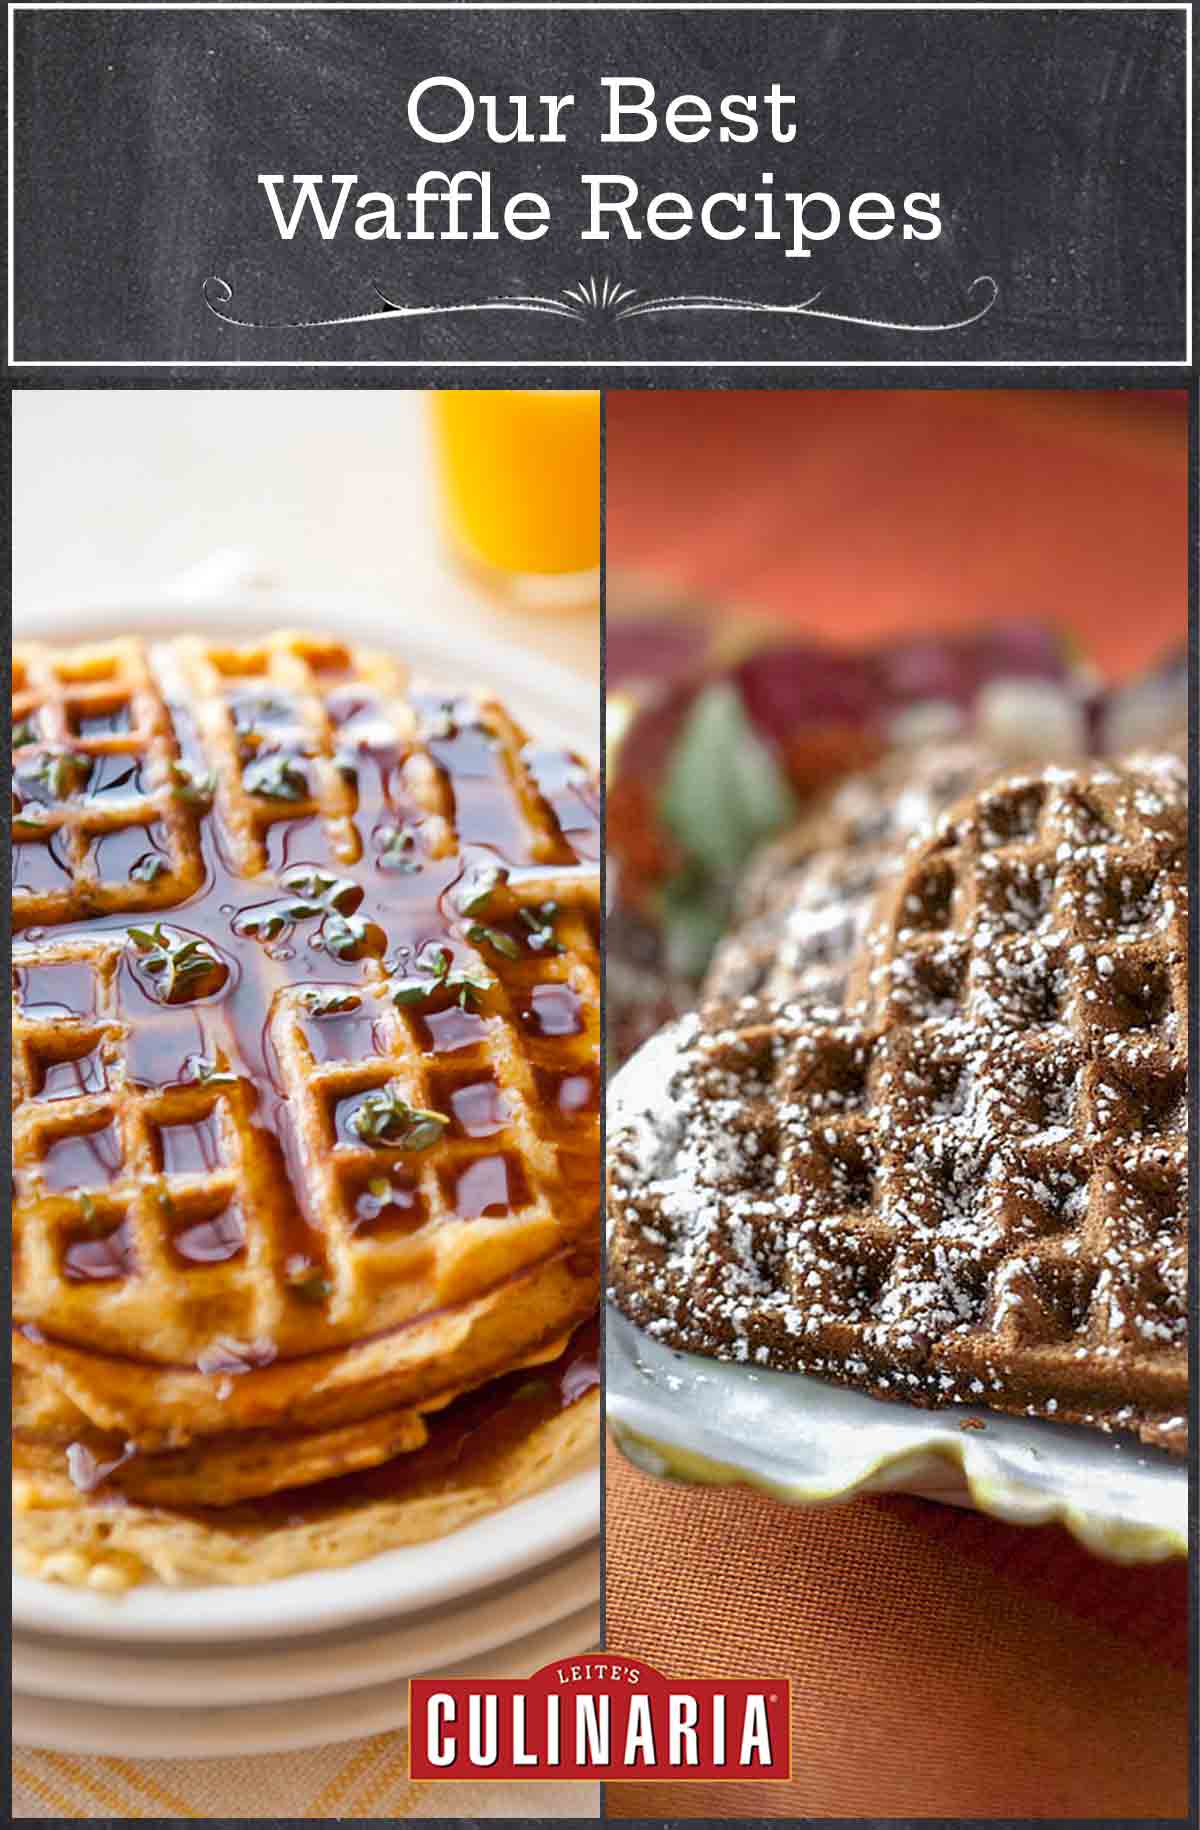 A grid of 2 images of waffles.